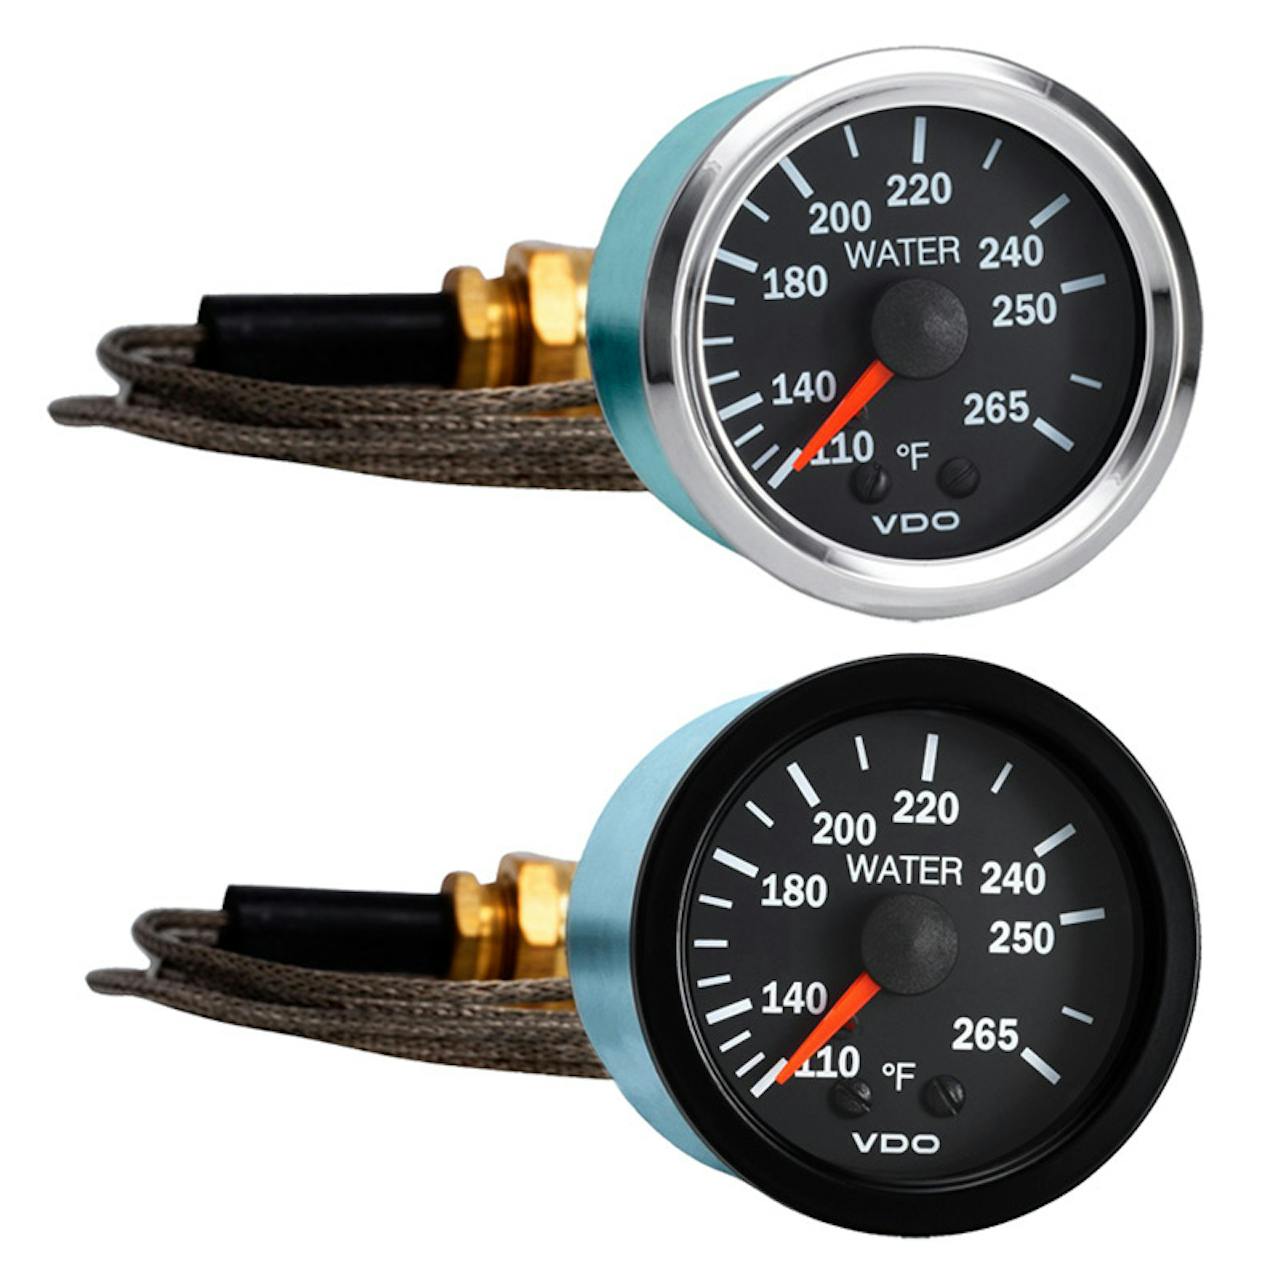 https://raneys-cdn11.imgix.net/images/stencil/original/products/192720/90076/Semi_Truck_Mechanical_Water_Temperature_Gauge_With_Capillary_Vision_180_101__69806.1430254482.jpg?auto=compress,format&w=1280